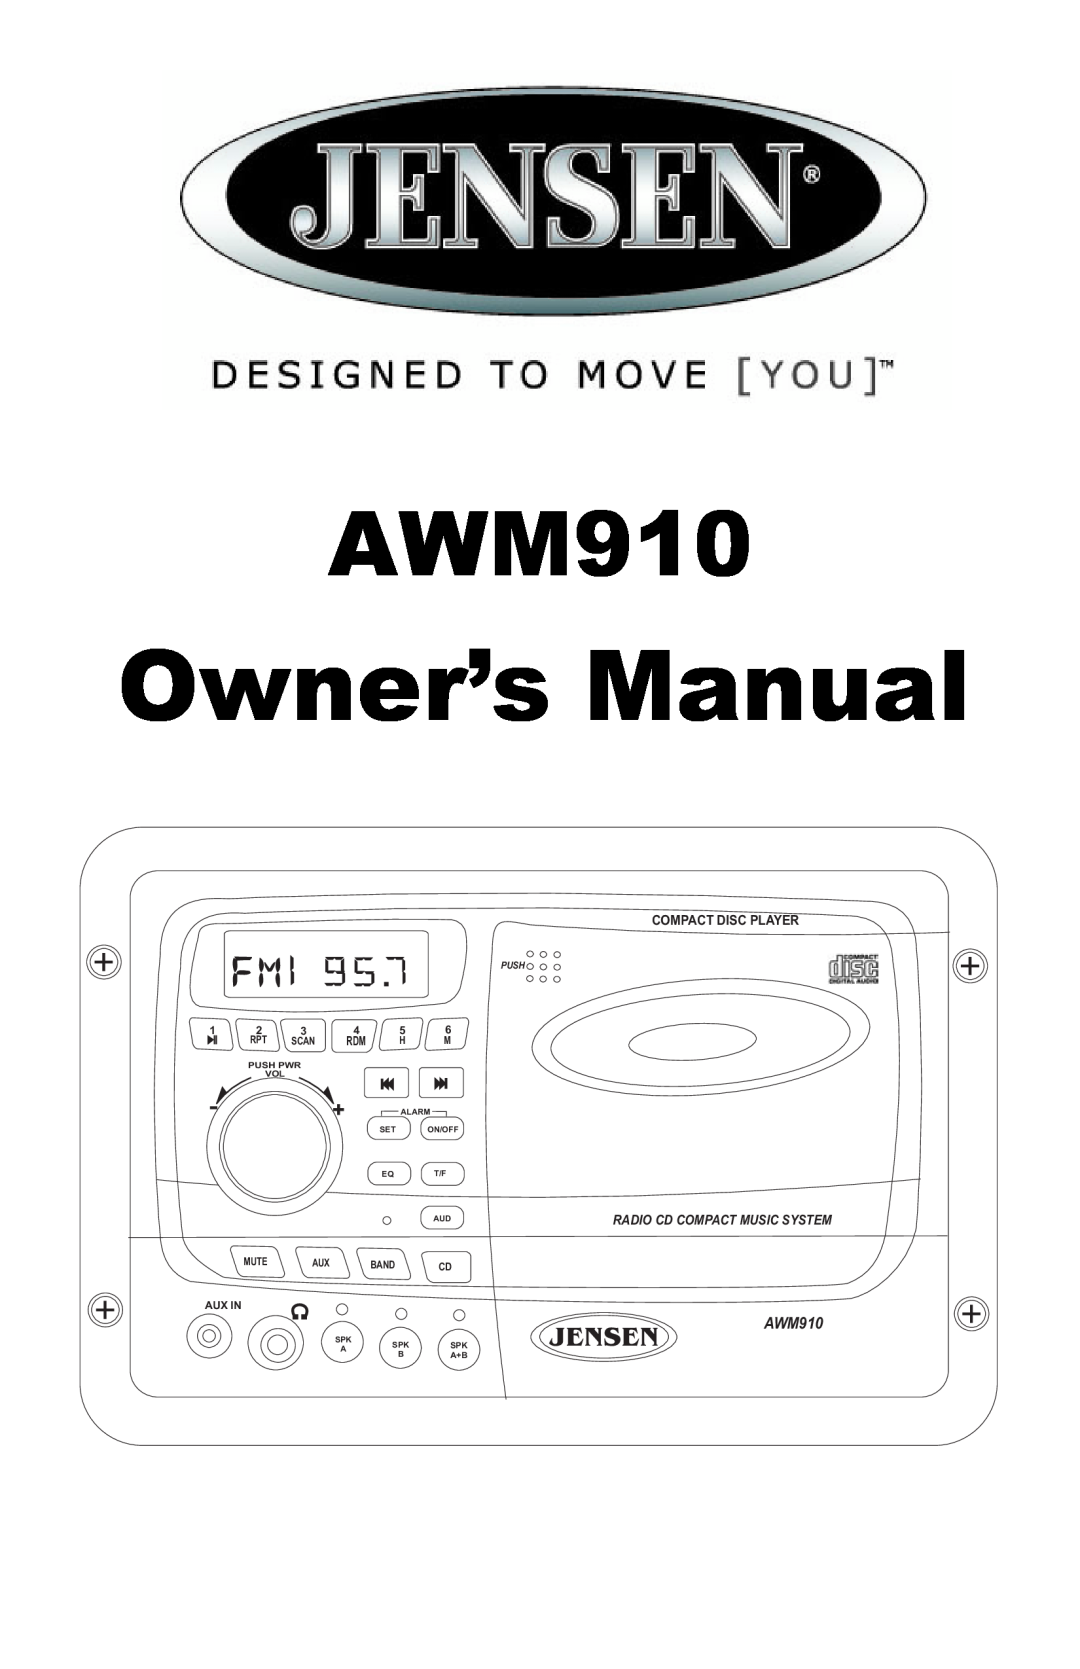 Jensen AWM910 owner manual Jensen, Compact Disc Player, Radio Cd Compact Music System, Band, Aux In, Push 